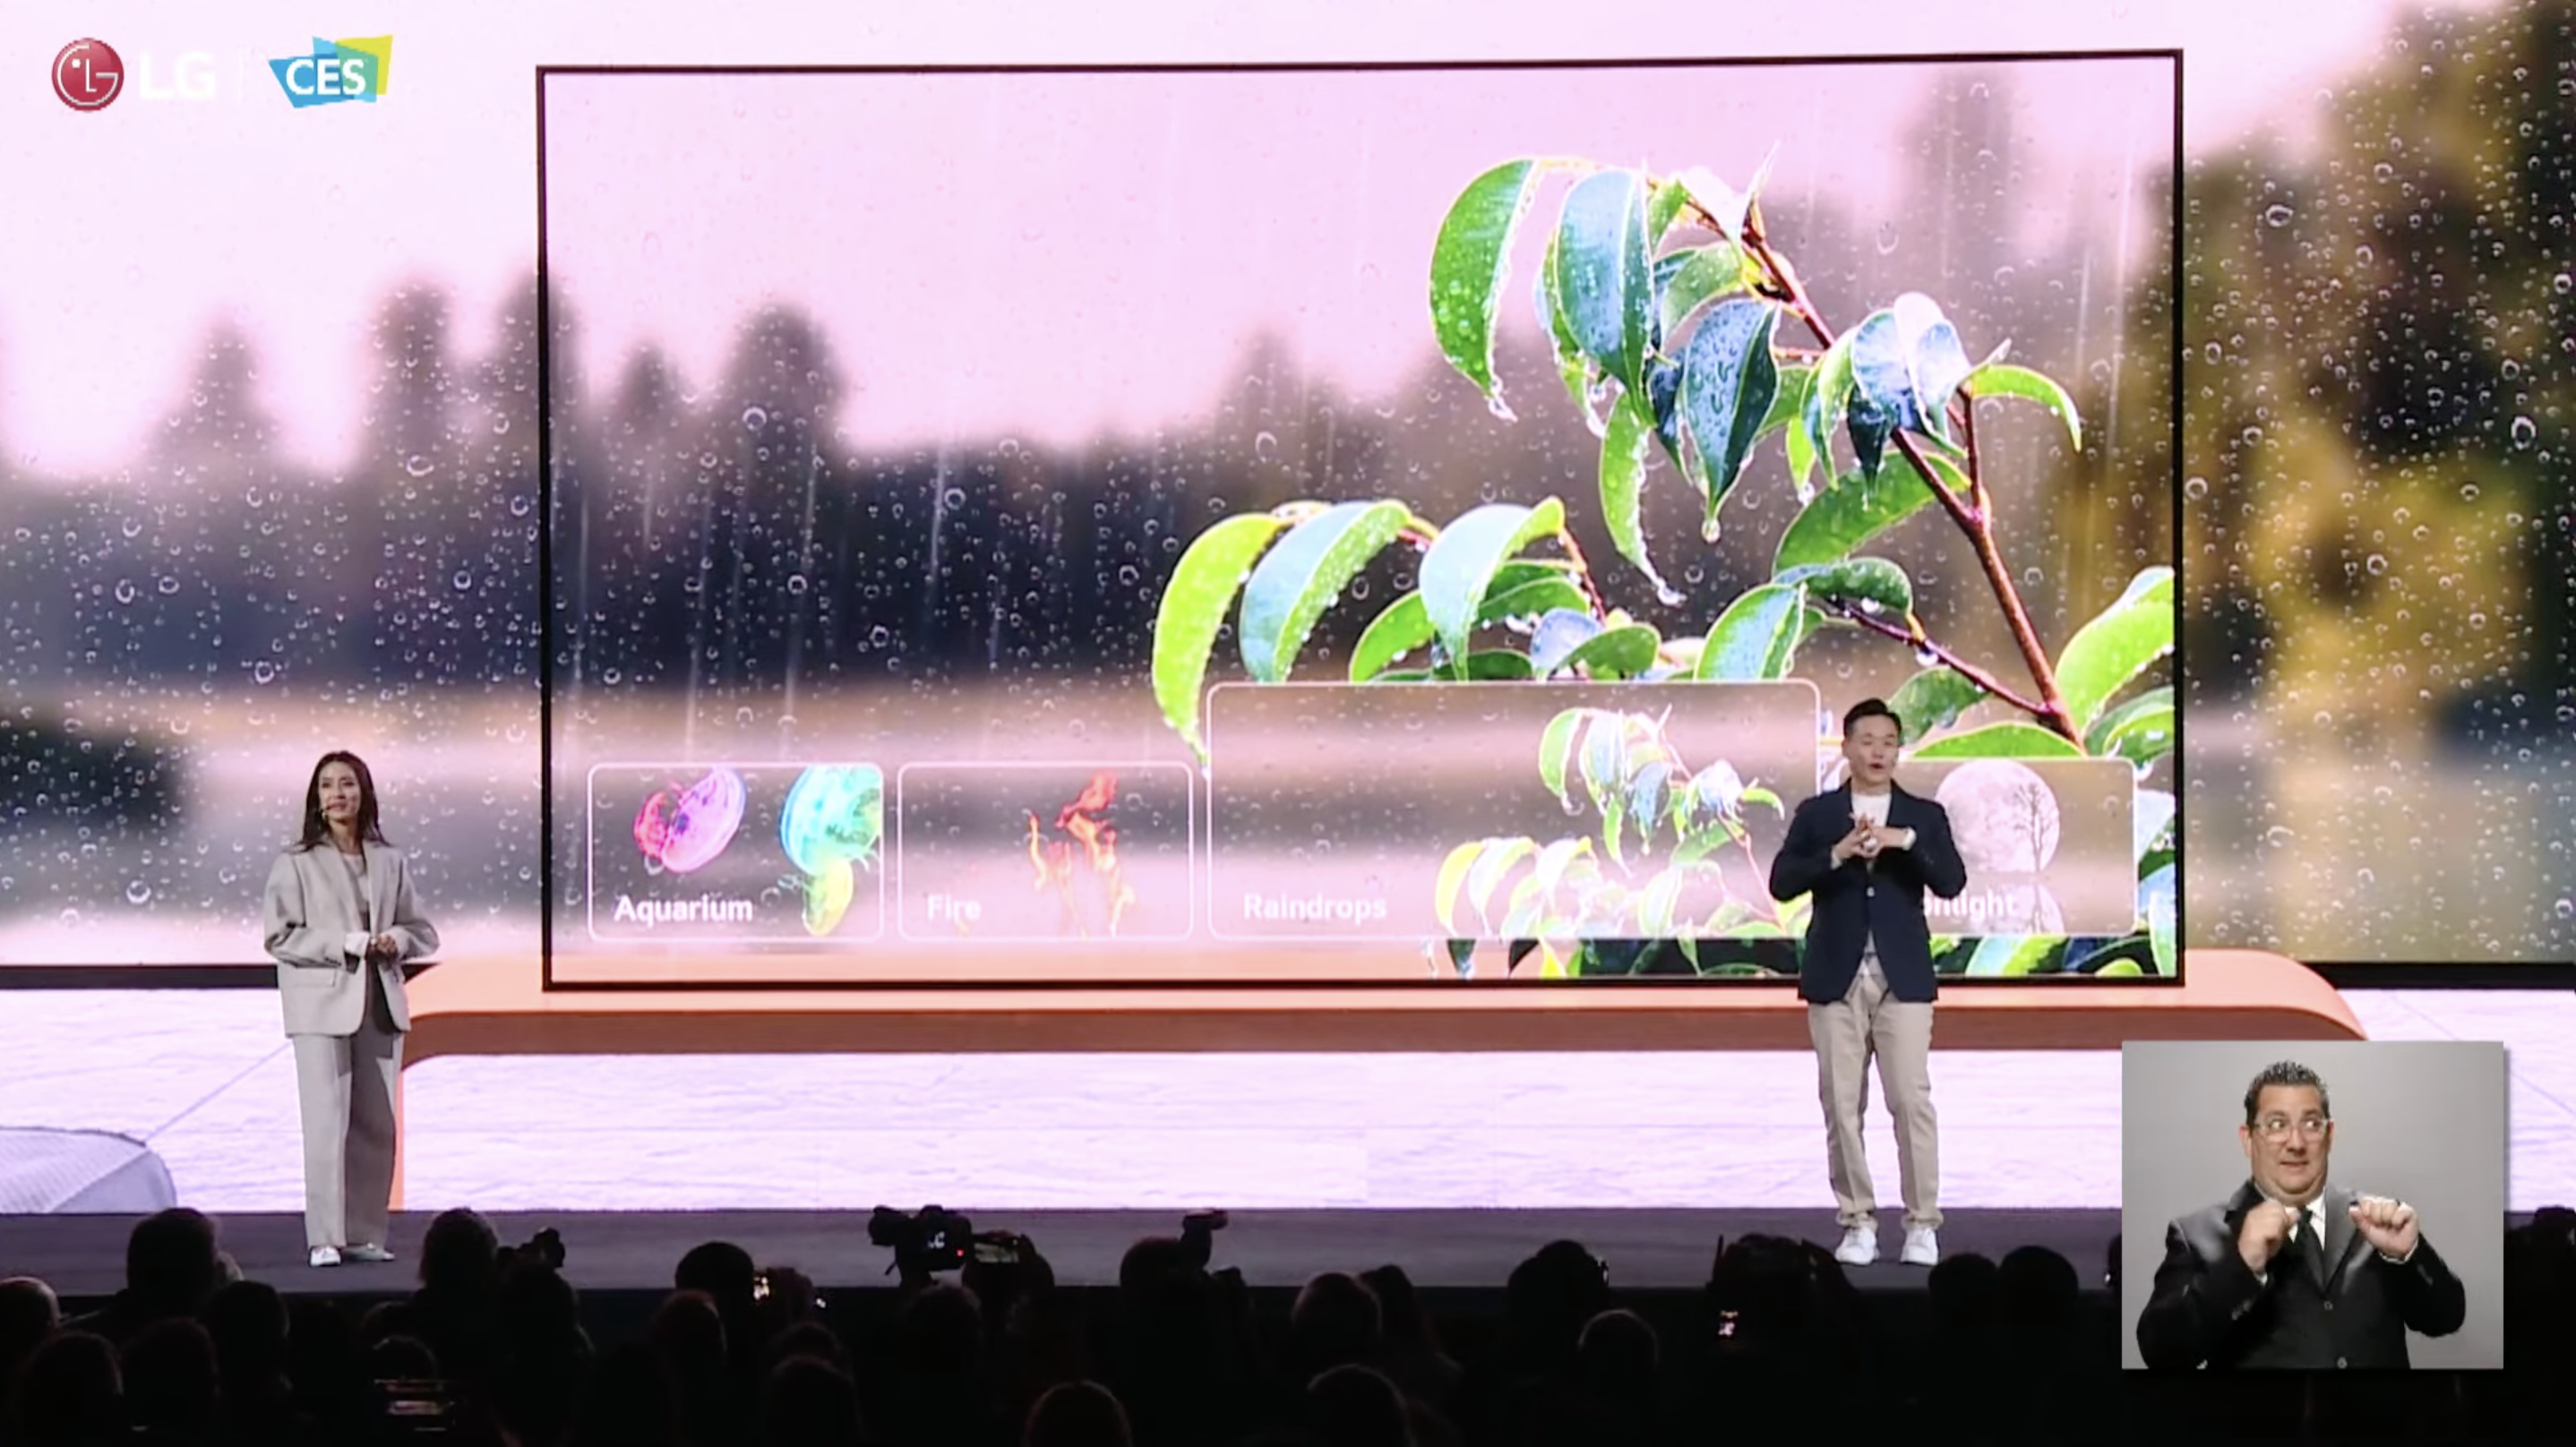 An image from LG's CES 2023 keynote